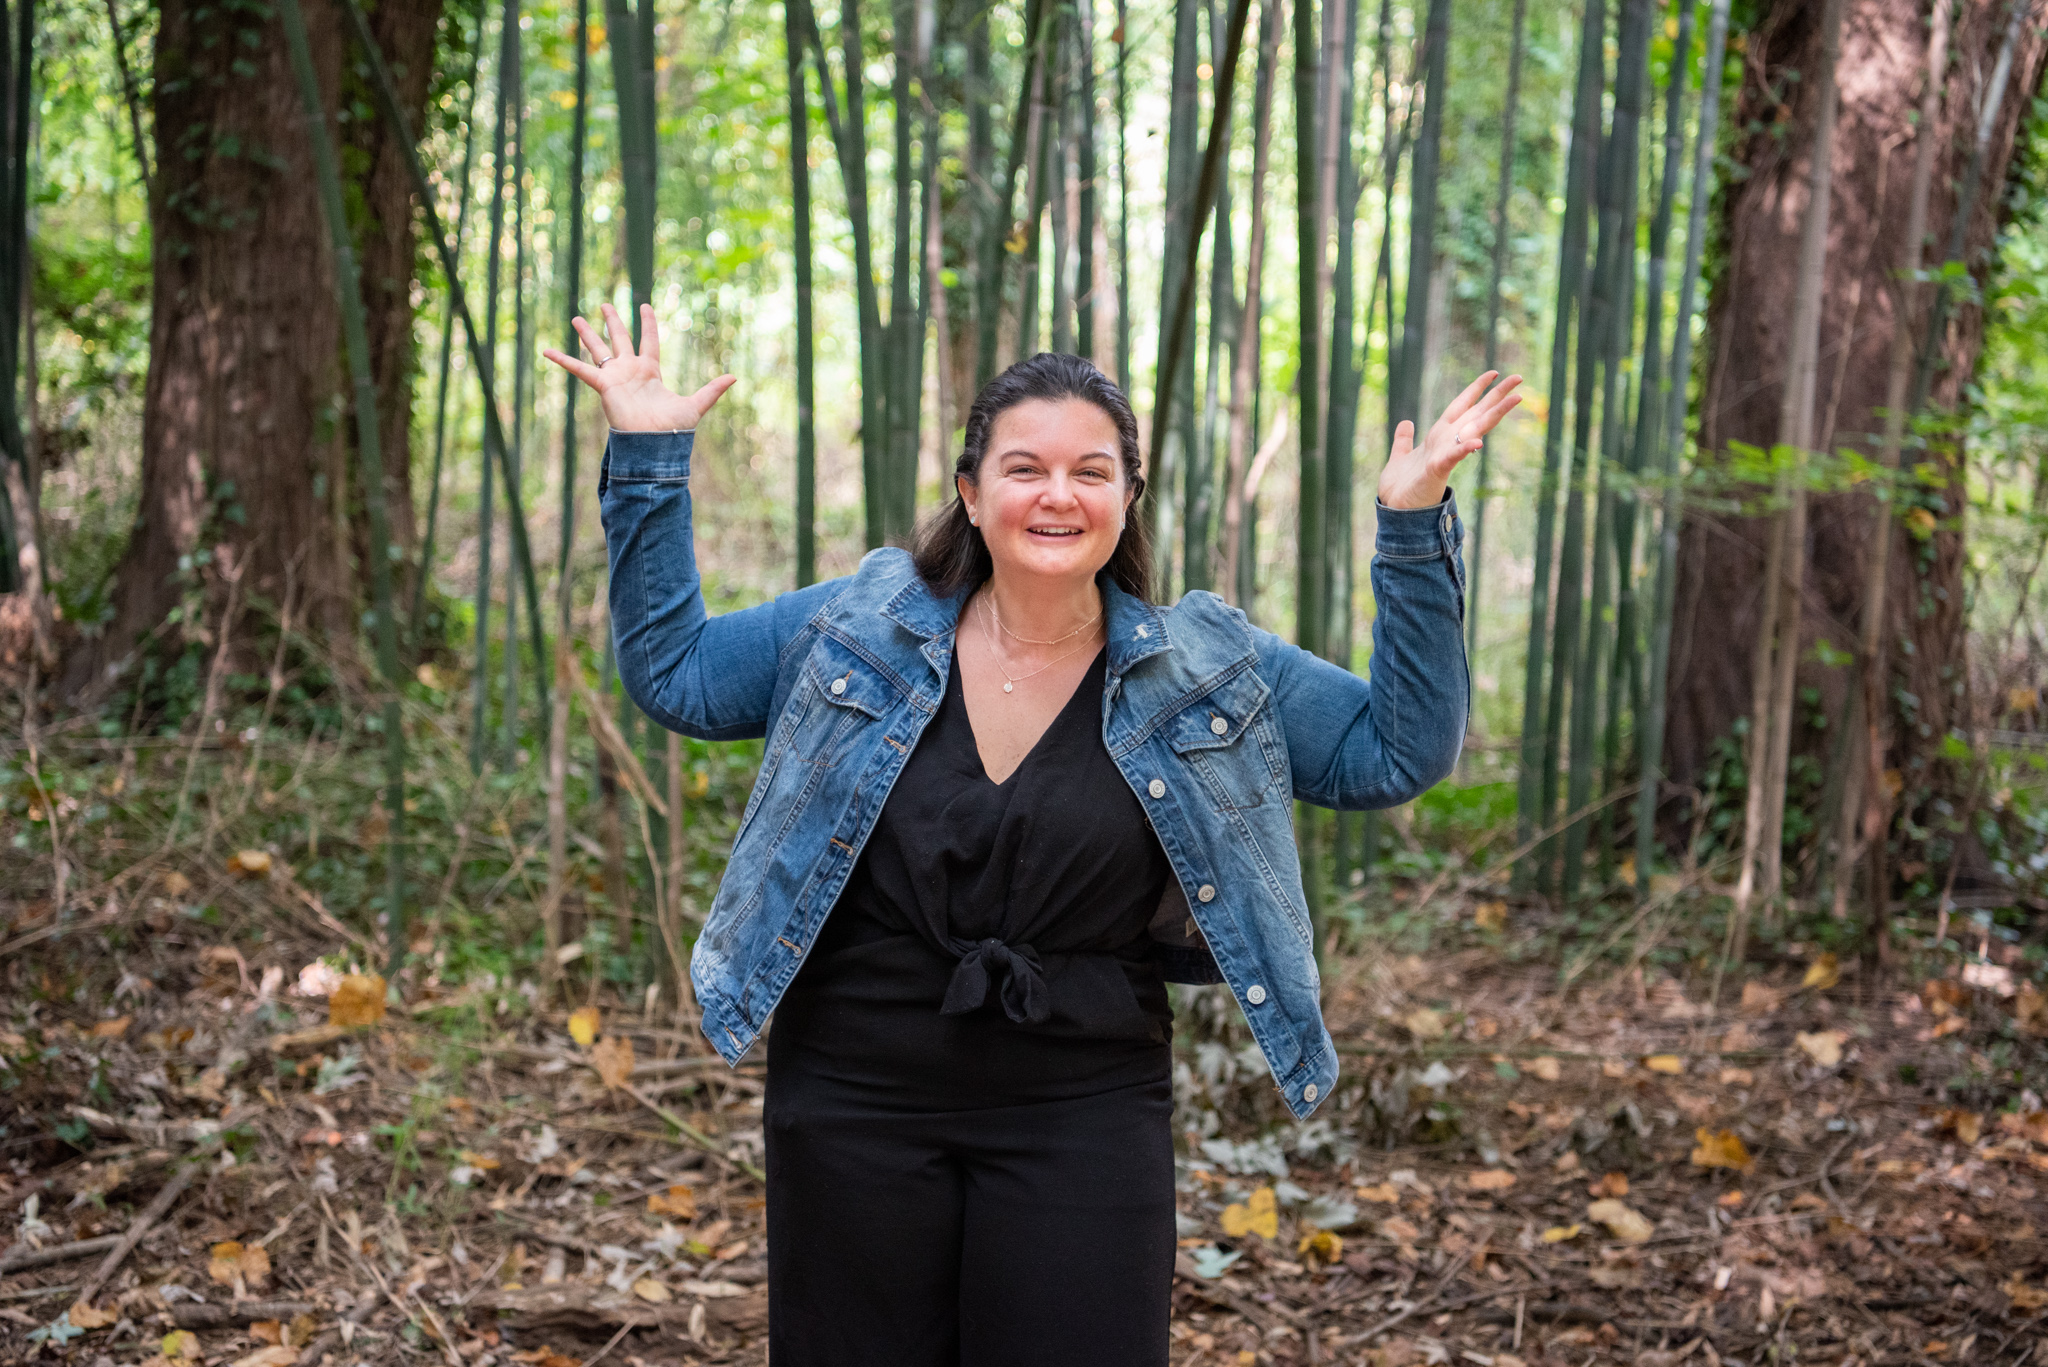 A Caucasian woman holding her hands up like I don't know in a bamboo forest.